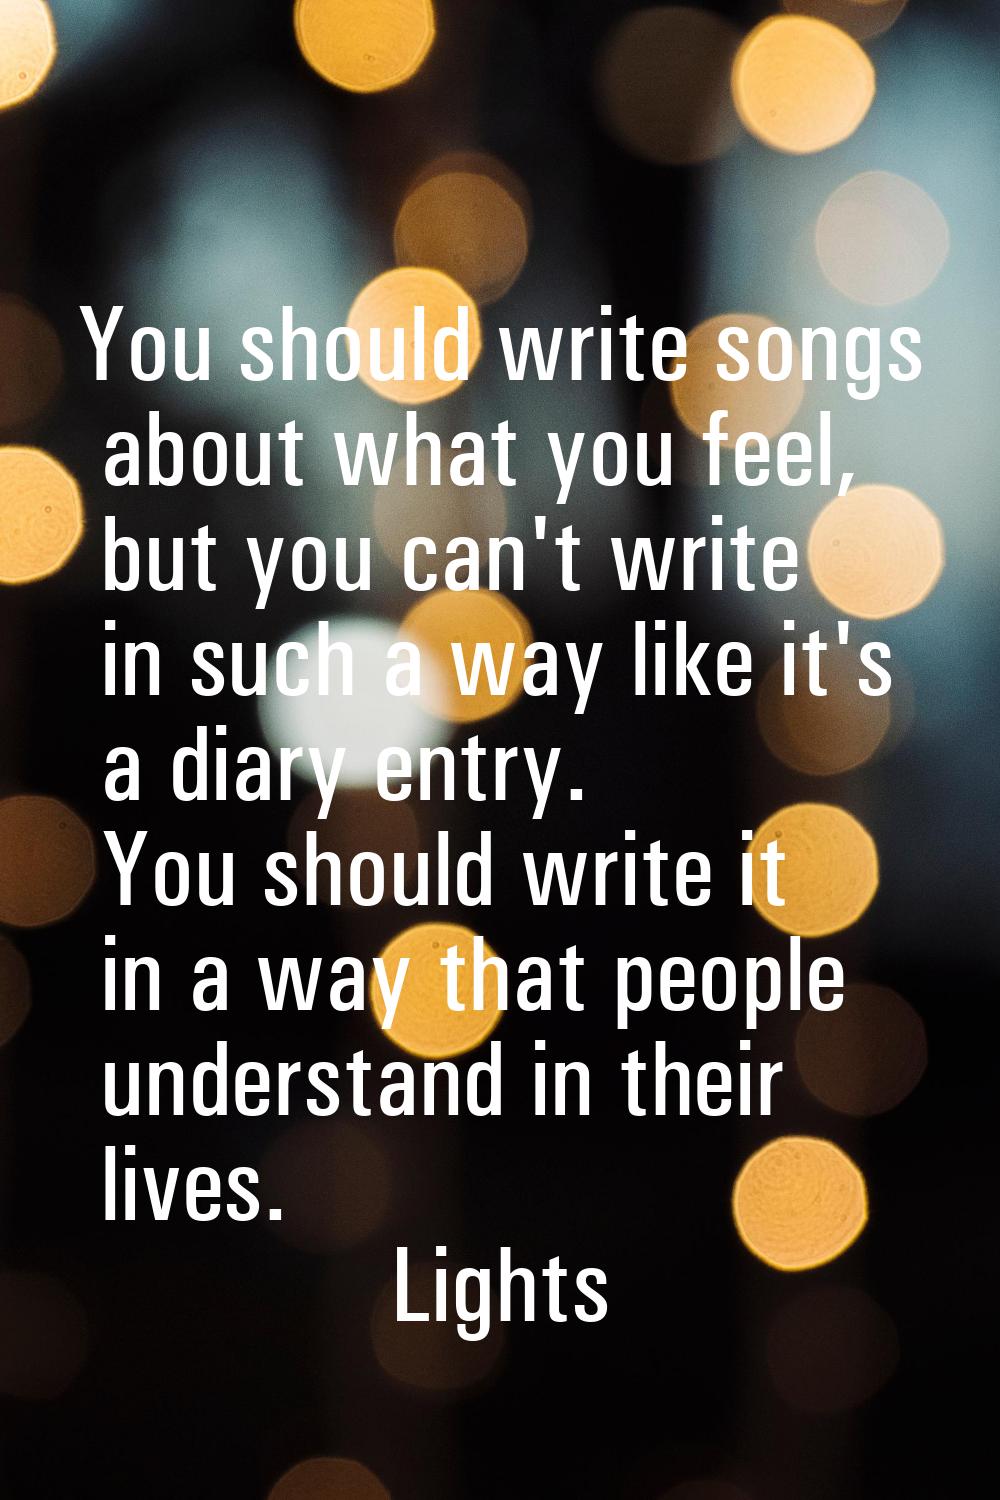 You should write songs about what you feel, but you can't write in such a way like it's a diary ent